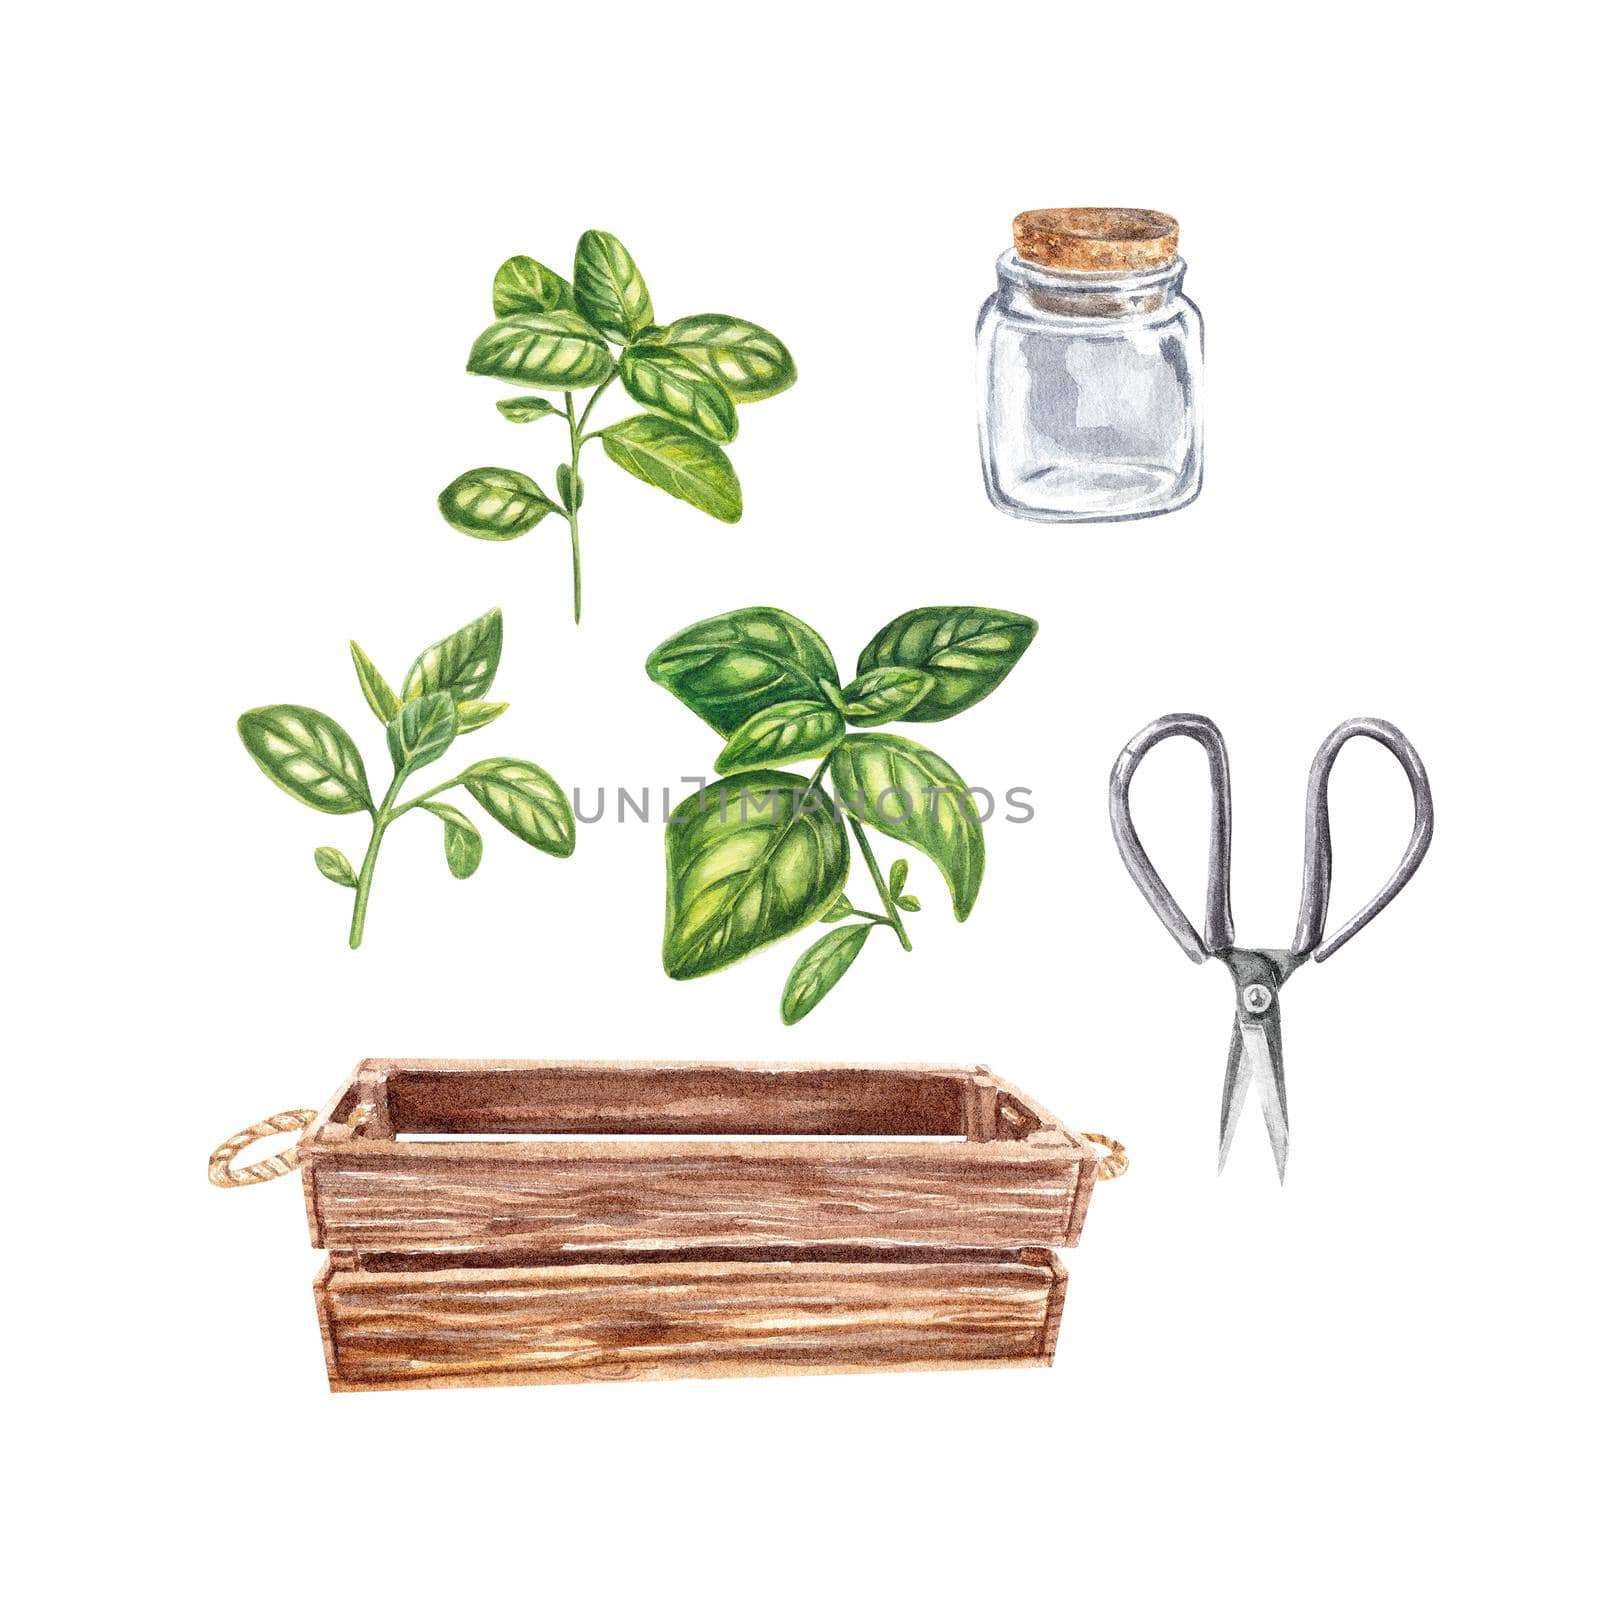 Provencal herbs: basil, rosemary, cumin, marjoram. Watercolor illustration on a white background. kitchen spices. Homemade spicy herbs. illustration is suitable for booklets, restaurant menus, design